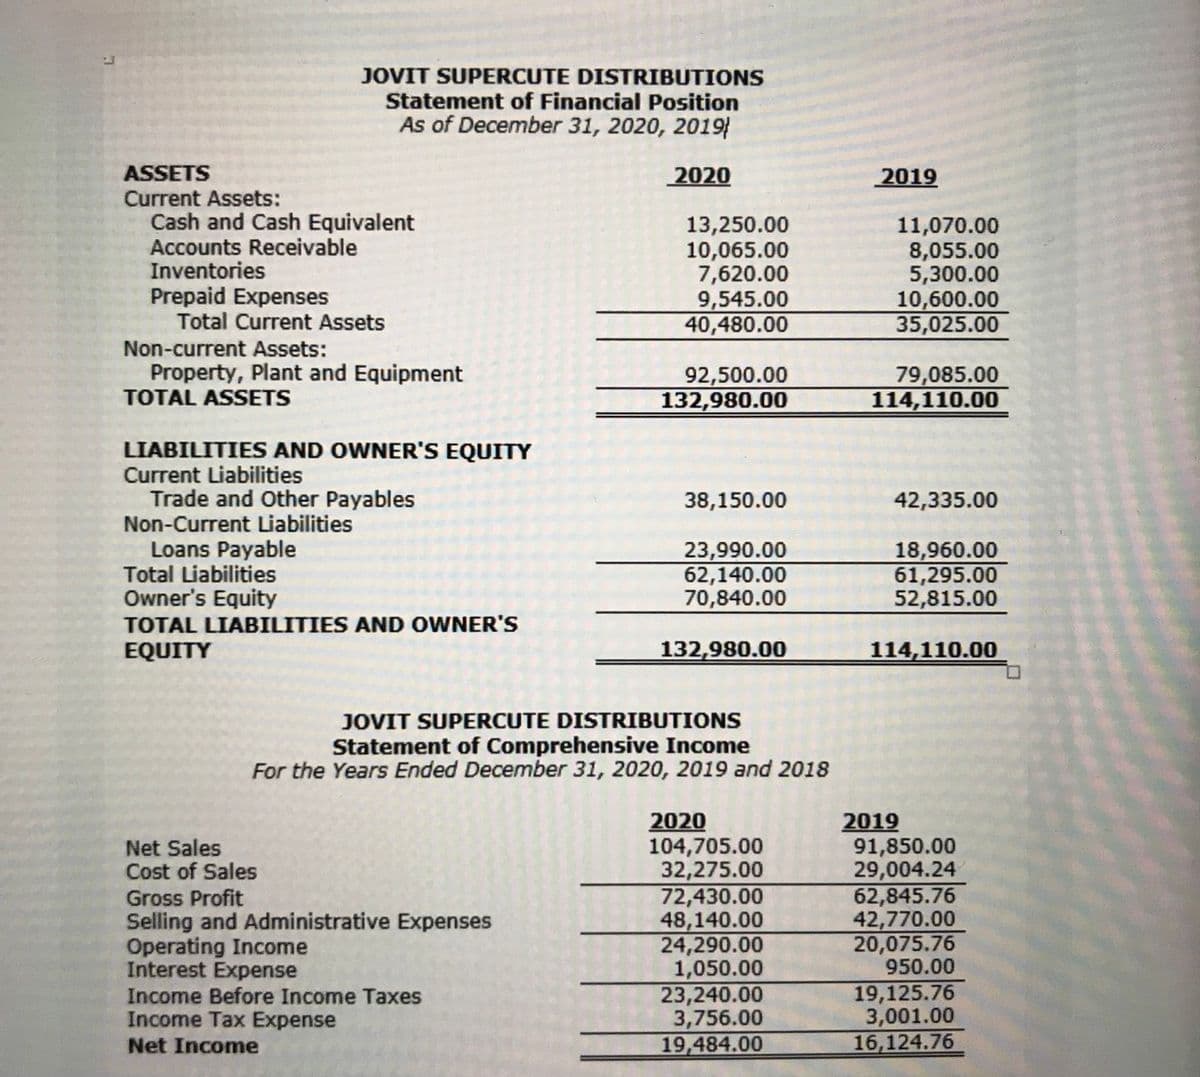 JOVIT SUPERCUTE DISTRIBUTIONS
Statement of Financial Position
As of December 31, 2020, 2019
ASSETS
2020
2019
Current Assets:
Cash and Cash Equivalent
Accounts Receivable
Inventories
Prepaid Expenses
Total Current Assets
13,250.00
10,065.00
7,620.00
9,545.00
40,480.00
11,070.00
8,055.00
5,300.00
10,600.00
35,025.00
Non-current Assets:
Property, Plant and Equipment
TOTAL ASSETS
92,500.00
132,980.00
79,085.00
114,110.00
LIABILITIES AND OWNER'S EQUITY
Current Liabilities
Trade and Other Payables
Non-Current Liabilities
Loans Payable
Total Liabilities
Owner's Equity
TOTAL LIABILITIES AND OWNER'S
38,150.00
42,335.00
23,990.00
62,140.00
70,840.00
18,960.00
61,295.00
52,815.00
EQUITY
132,980.00
114,110.00
JOVIT SUPERCUTE DISTRIBUTIONS
Statement of Comprehensive Income
For the Years Ended December 31, 2020, 2019 and 2018
Net Sales
Cost of Sales
Gross Profit
Selling and Administrative Expenses
Operating Income
Interest Expense
Income Before Income Taxes
Income Tax Expense
2020
104,705.00
32,275.00
72,430.00
48,140.00
24,290.00
1,050.00
23,240.00
3,756.00
19,484.00
2019
91,850.00
29,004.24
62,845.76
42,770.00
20,075.76
950.00
19,125.76
3,001.00
16,124.76
Net Income
